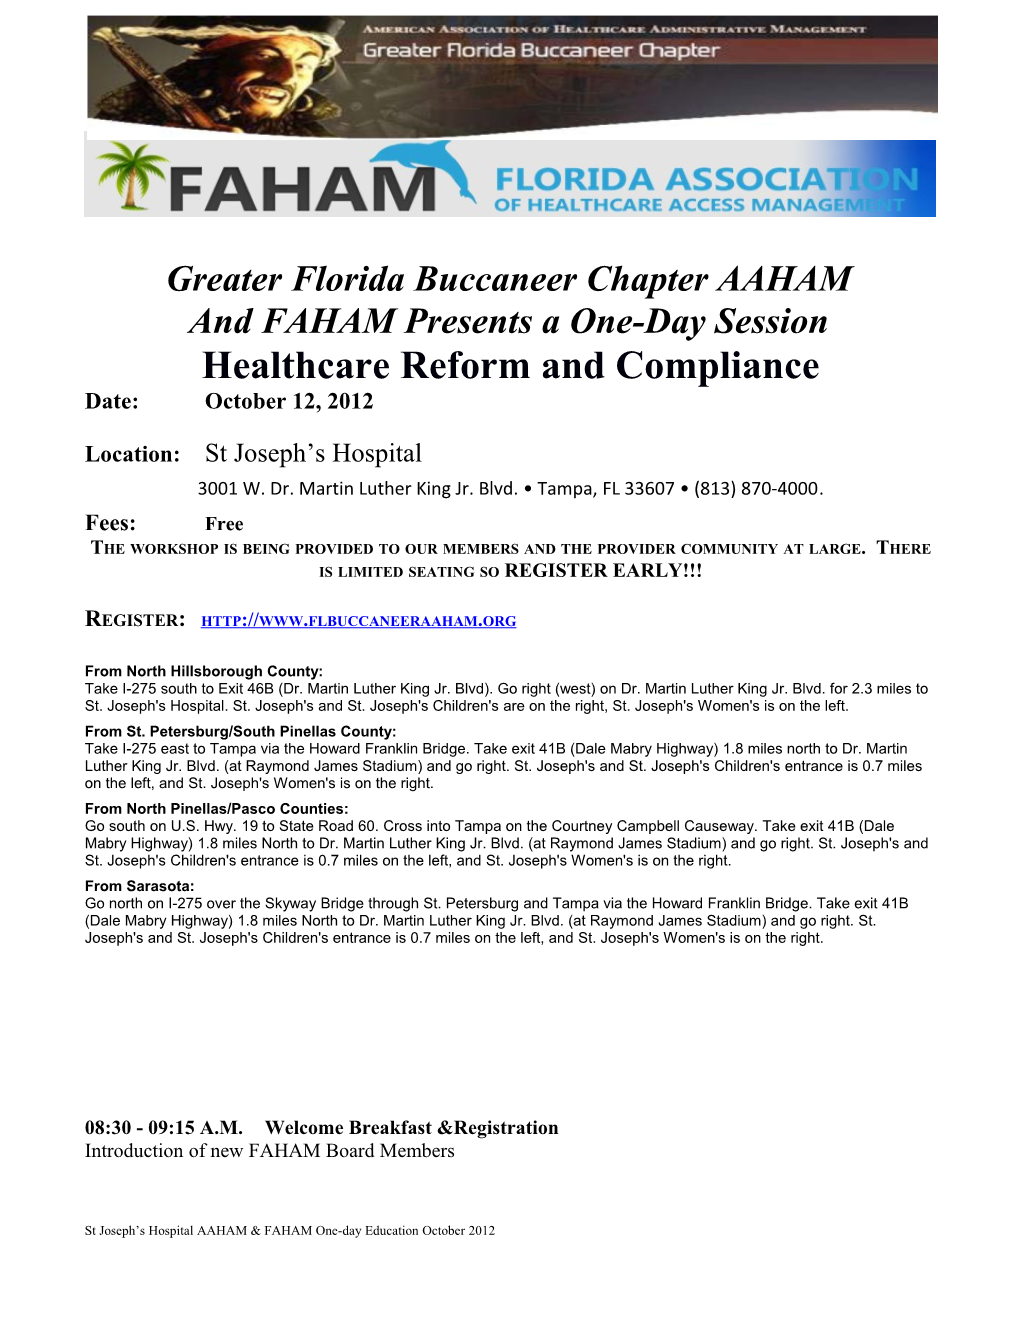 Greater Florida Buccaneer Chapter AAHAM Presents a Technology Update